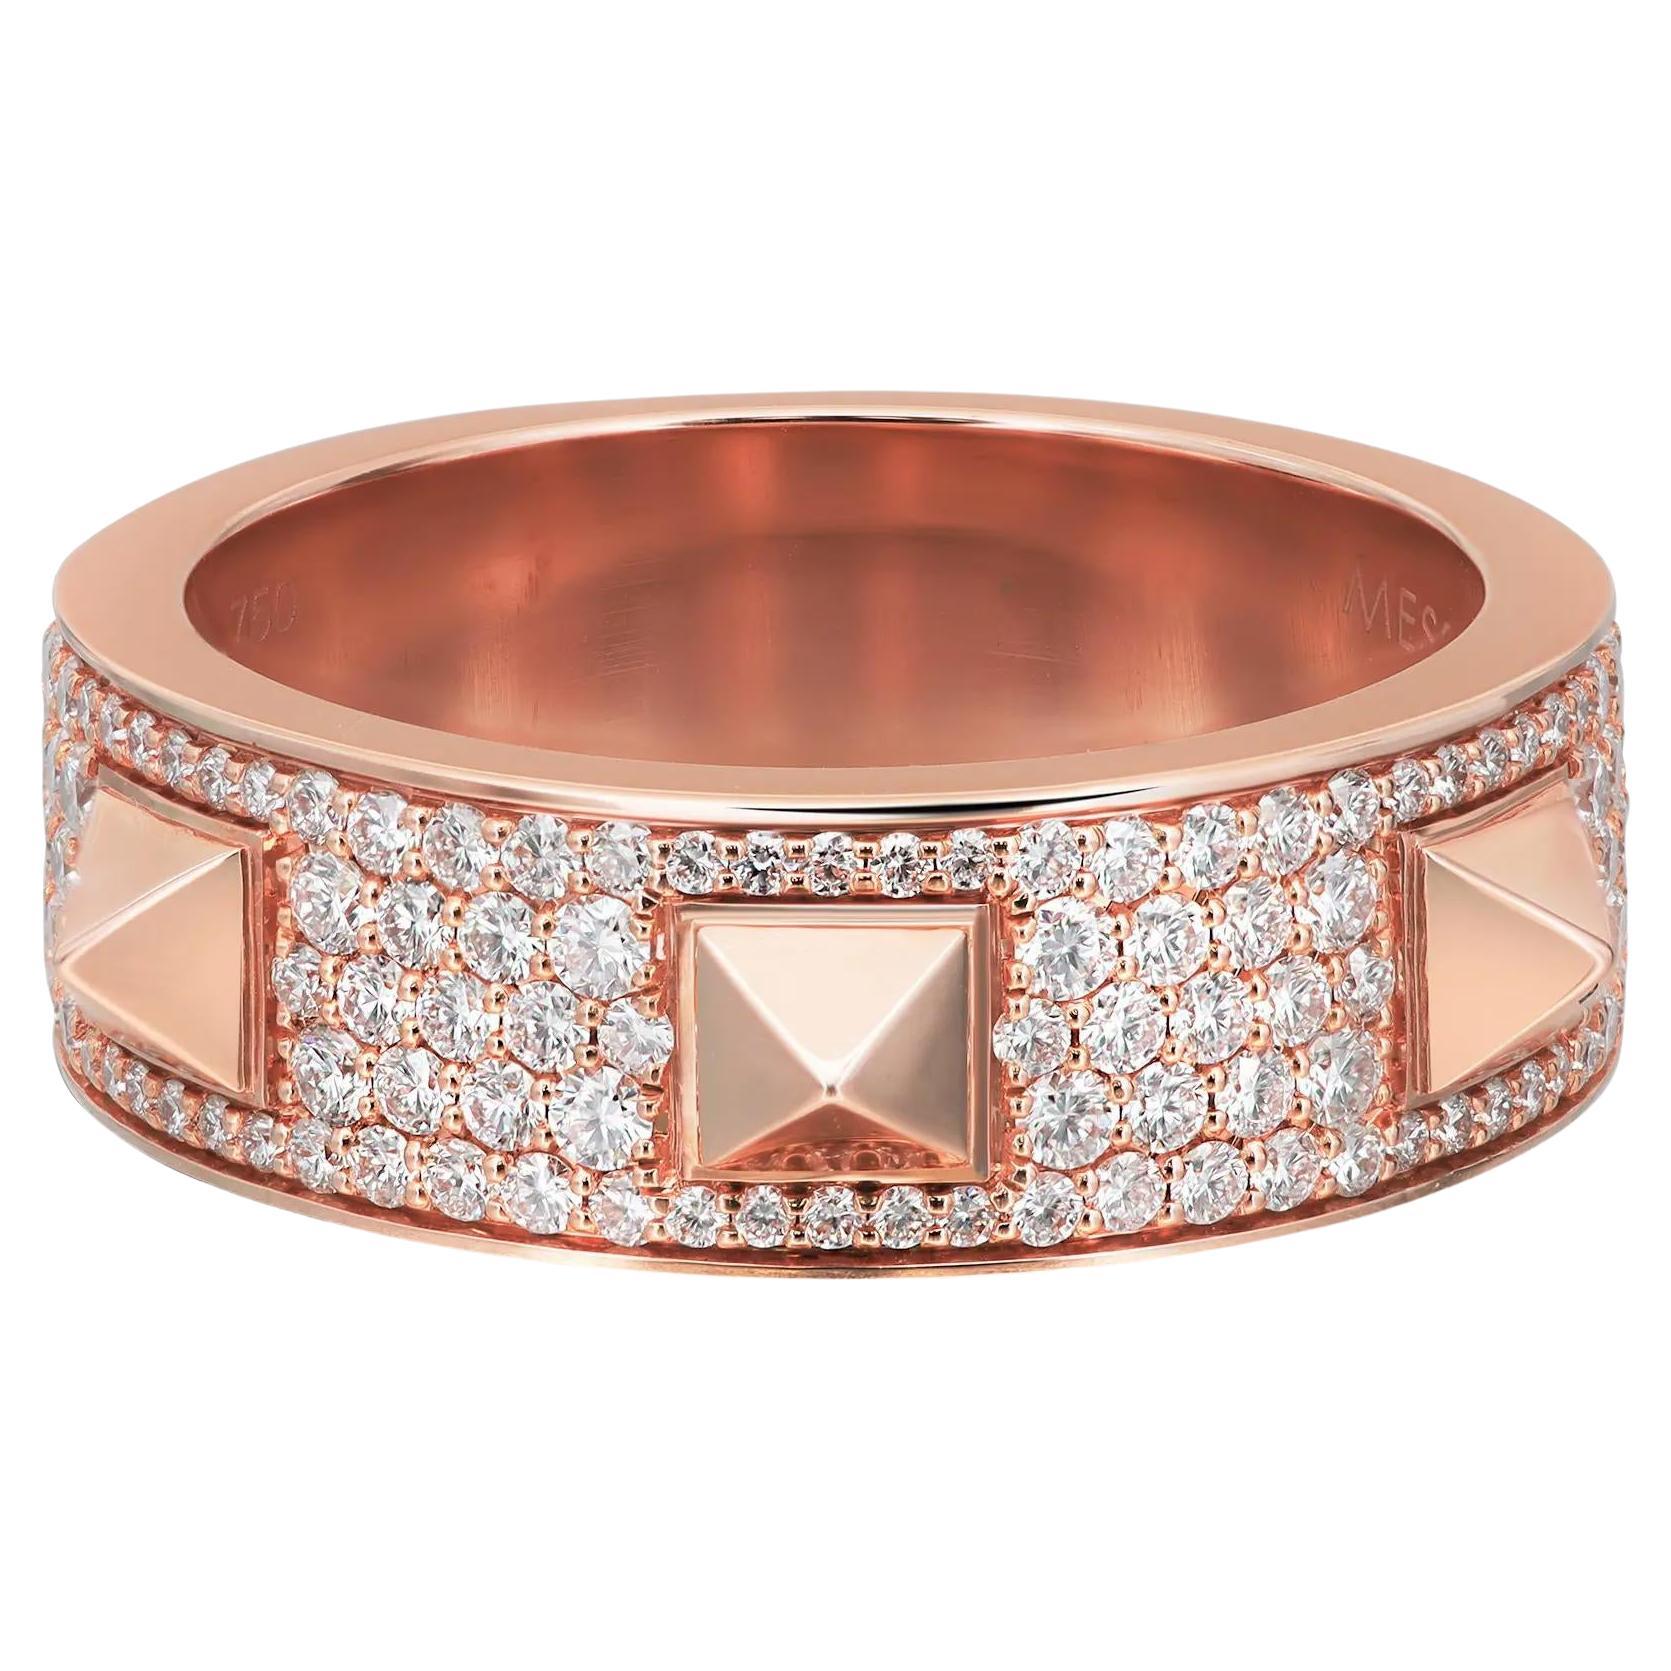 Messika 0.61Cttw Spiky Diamond Band Ring 18K Rose Gold Size 52 US 6.25 For Sale